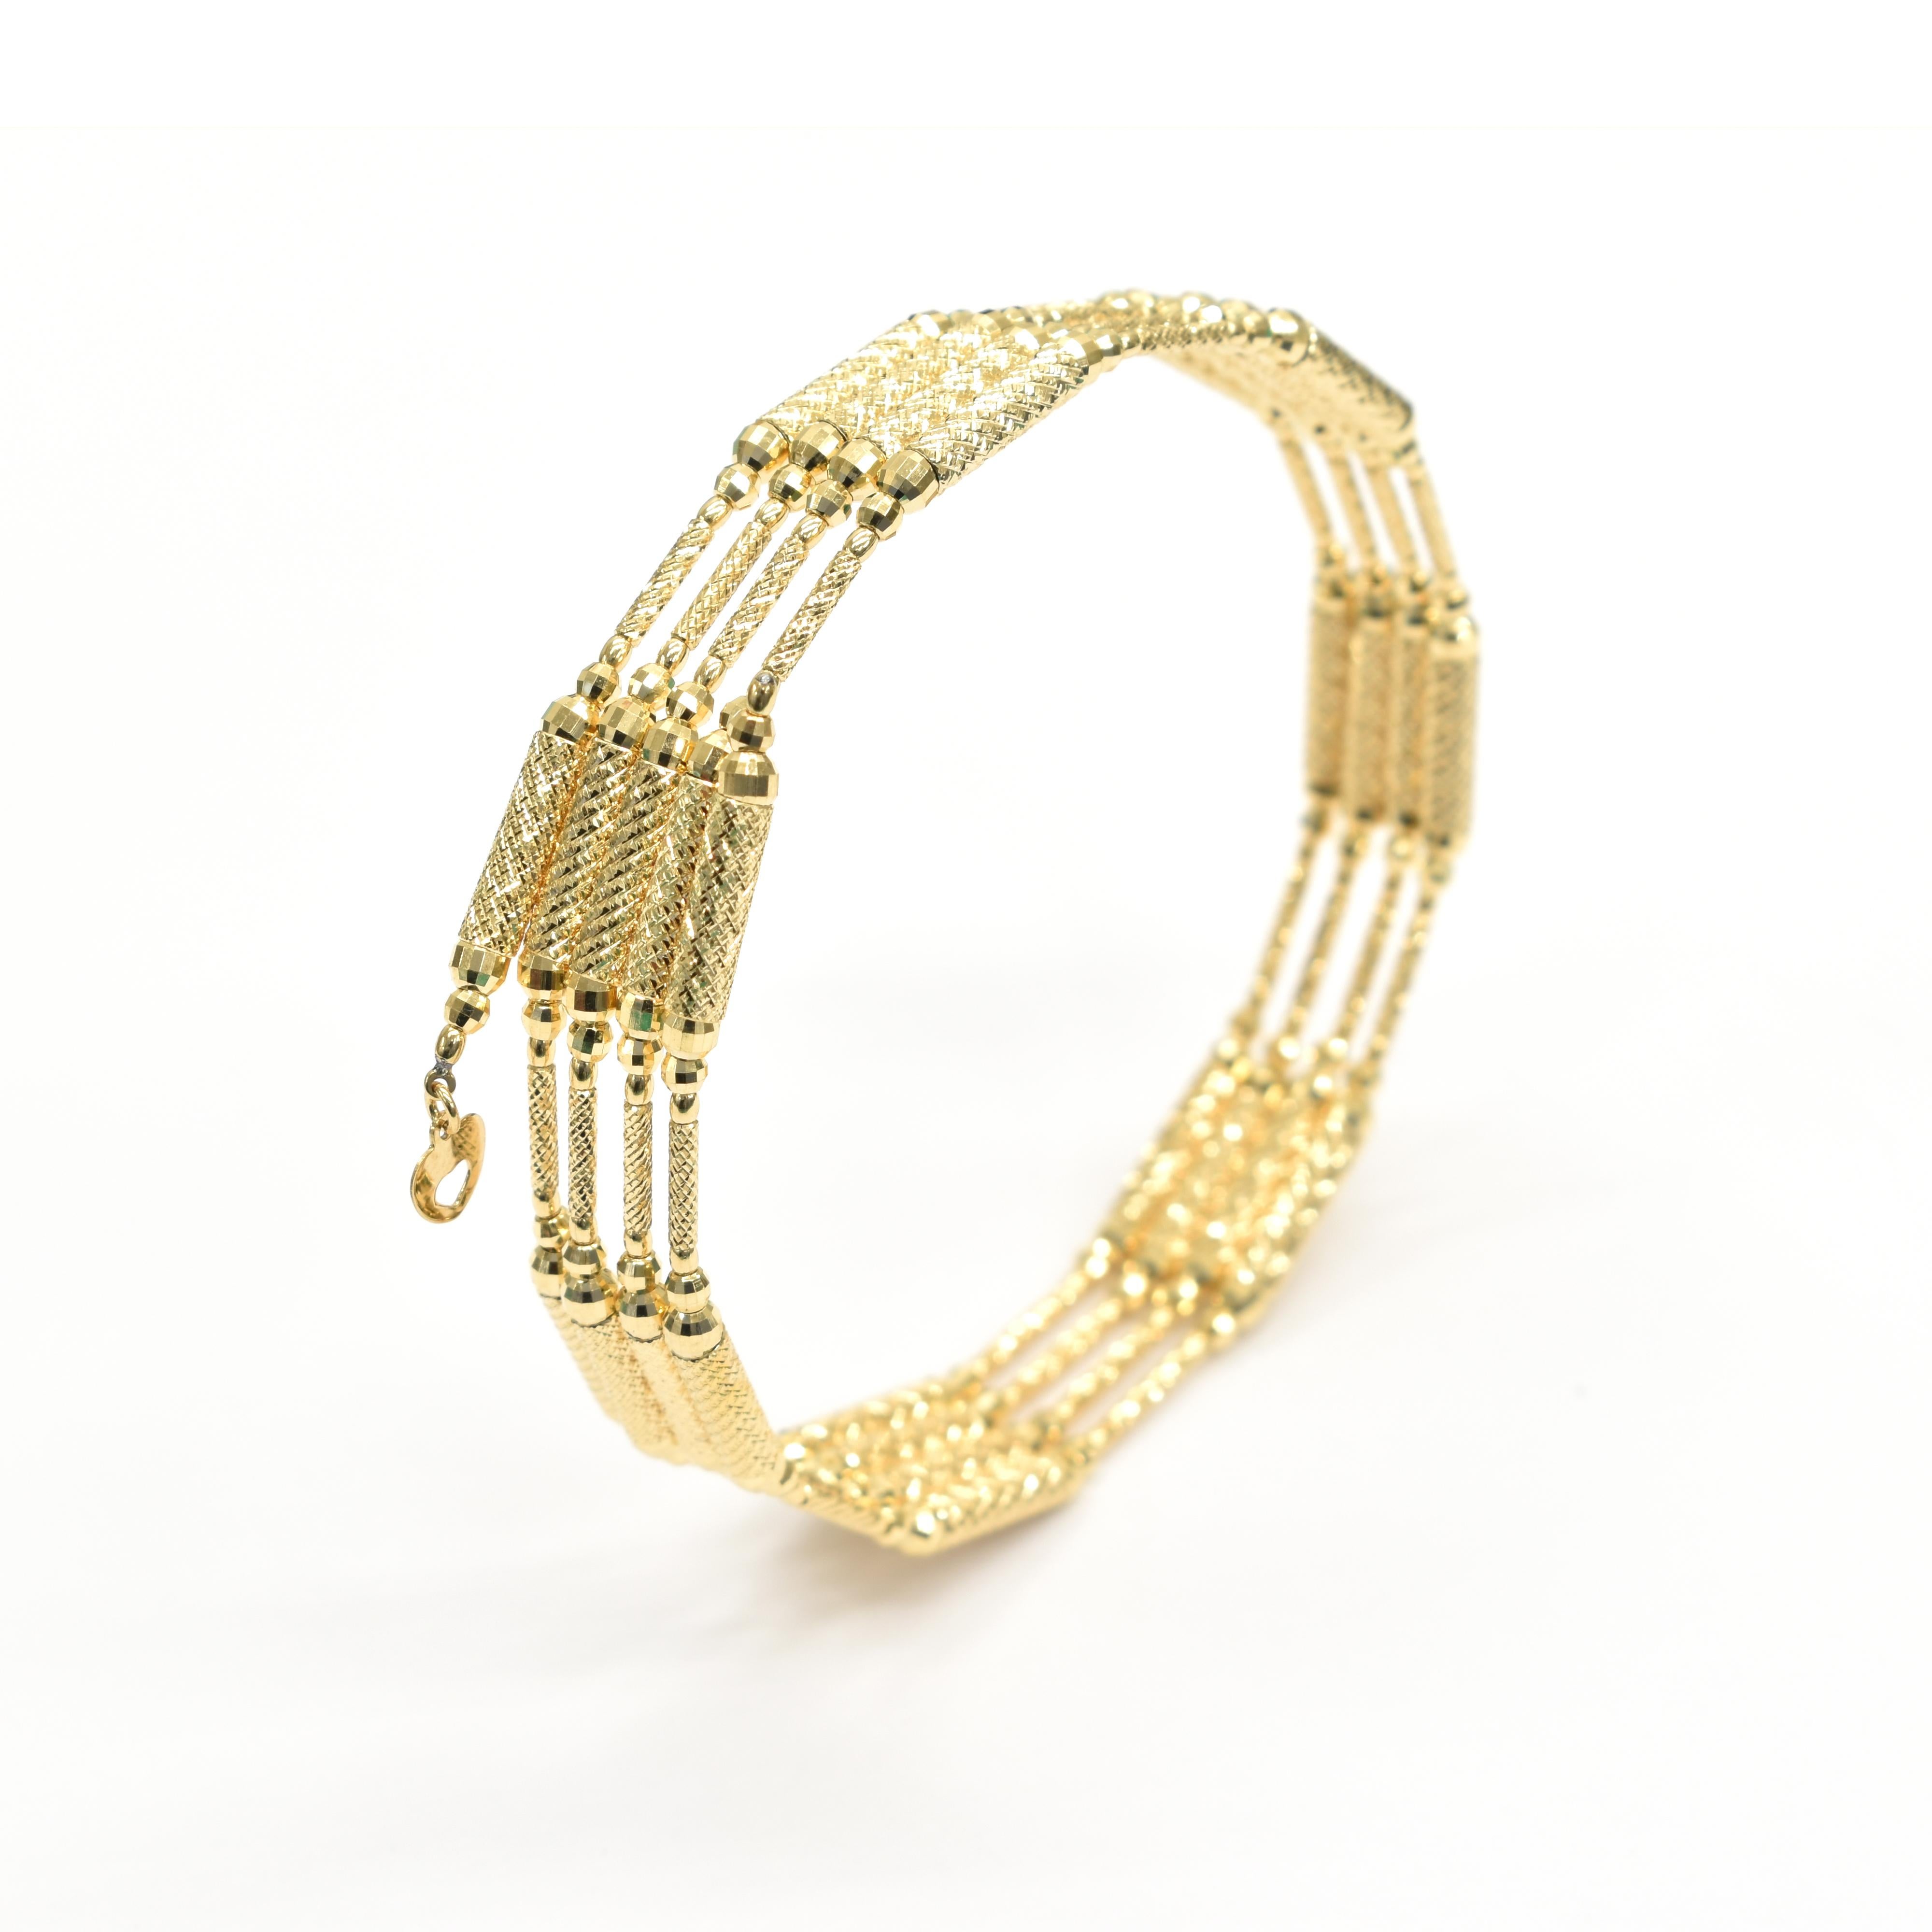 A stunning multi-use Bracelet-Necklace made in 18 Karat Yellow Gold with a magnetic mechanism. Approximately 6.5 grams of Gold. Can also be used as an anklet. Made in Japan. Contact us for more information!